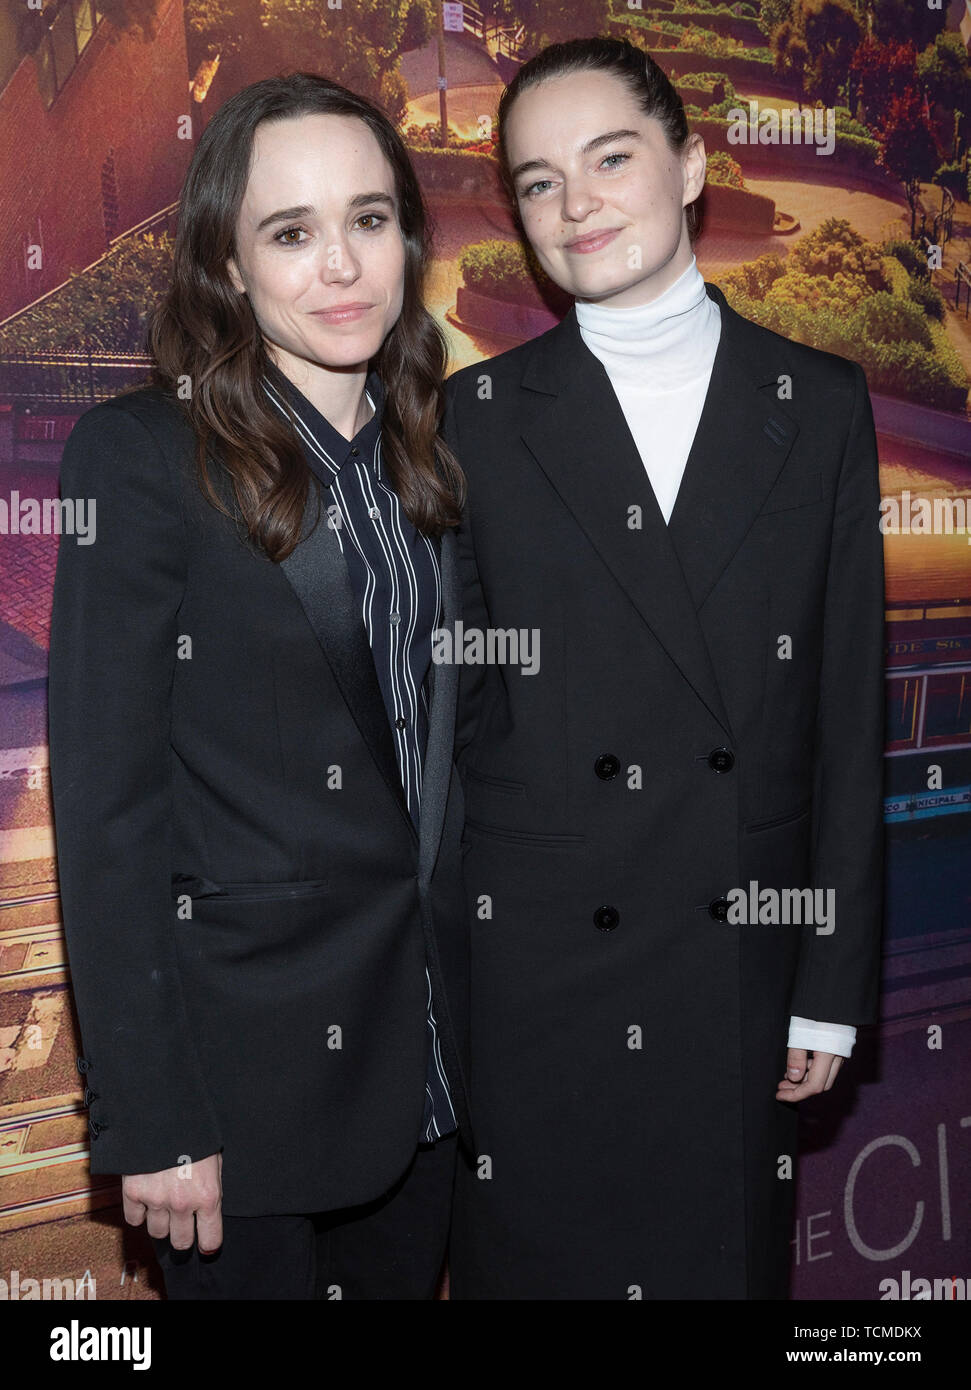 New York, United States. 04th June, 2019. Ellen Page and Emma Portner  attends Tales of the City New York premiere at Metrograph Credit: Lev  Radin/Pacific Press/Alamy Live News Stock Photo - Alamy